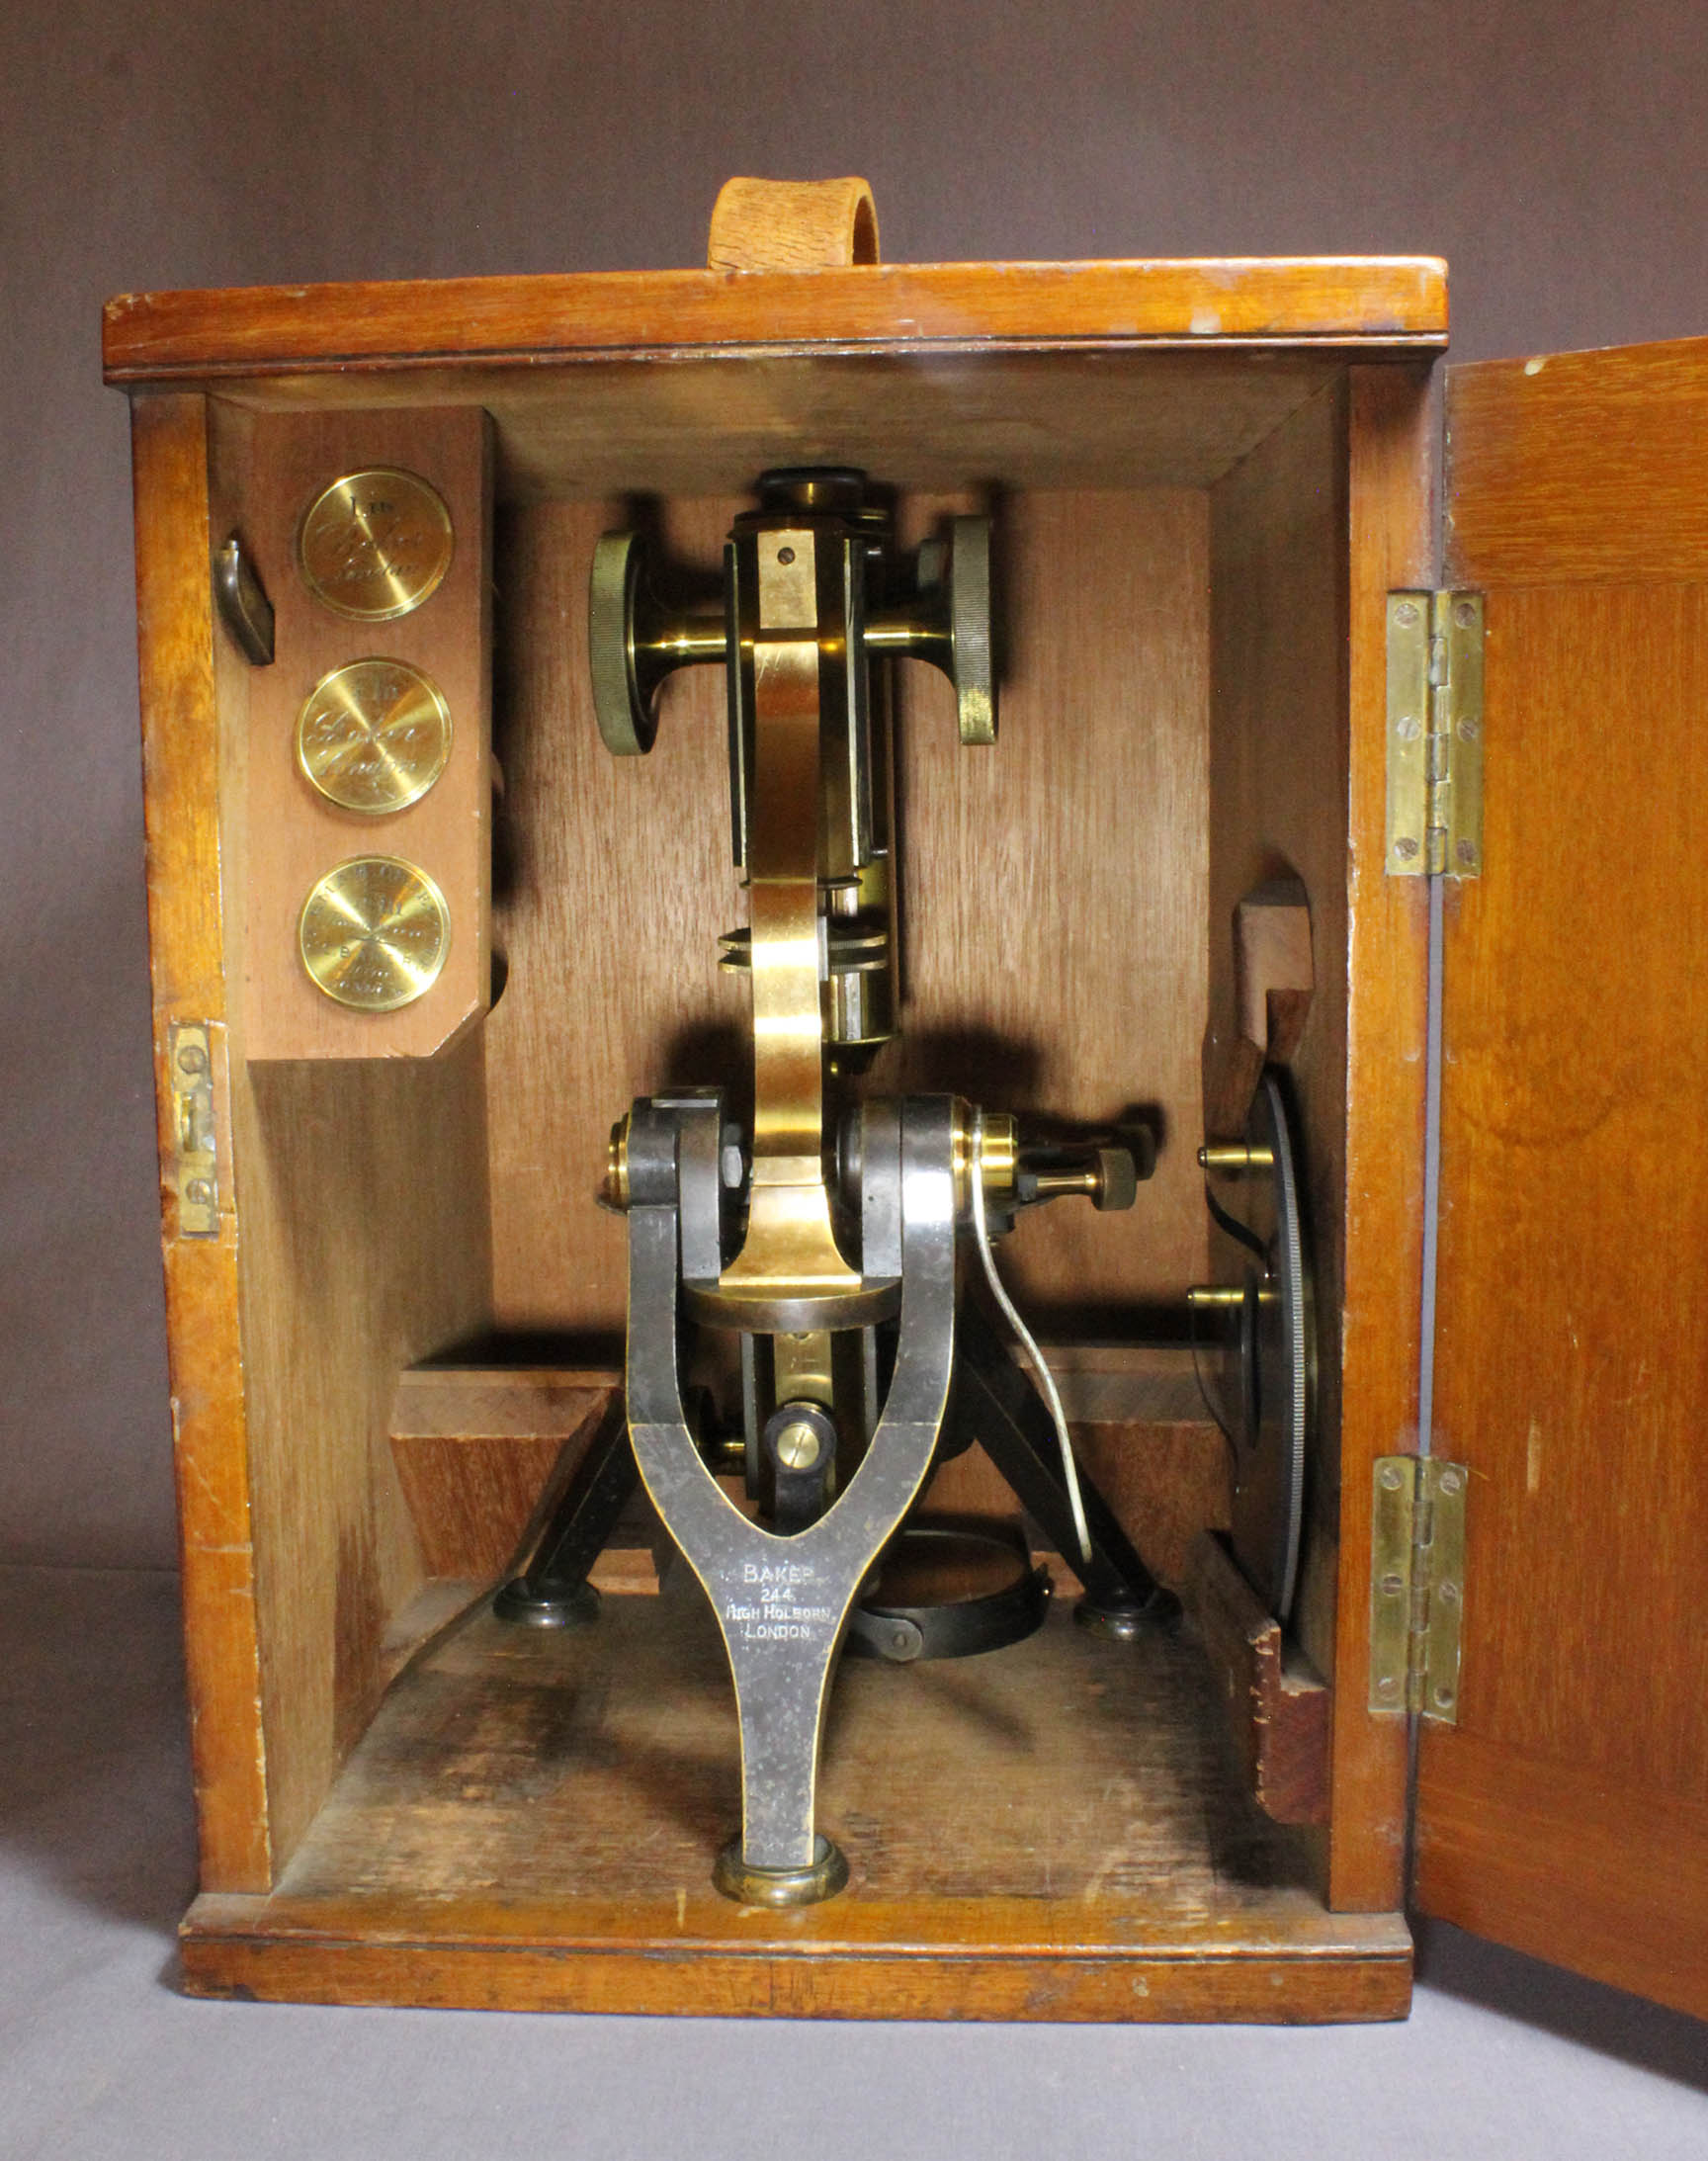 Nelson-Curties Microscope in Case